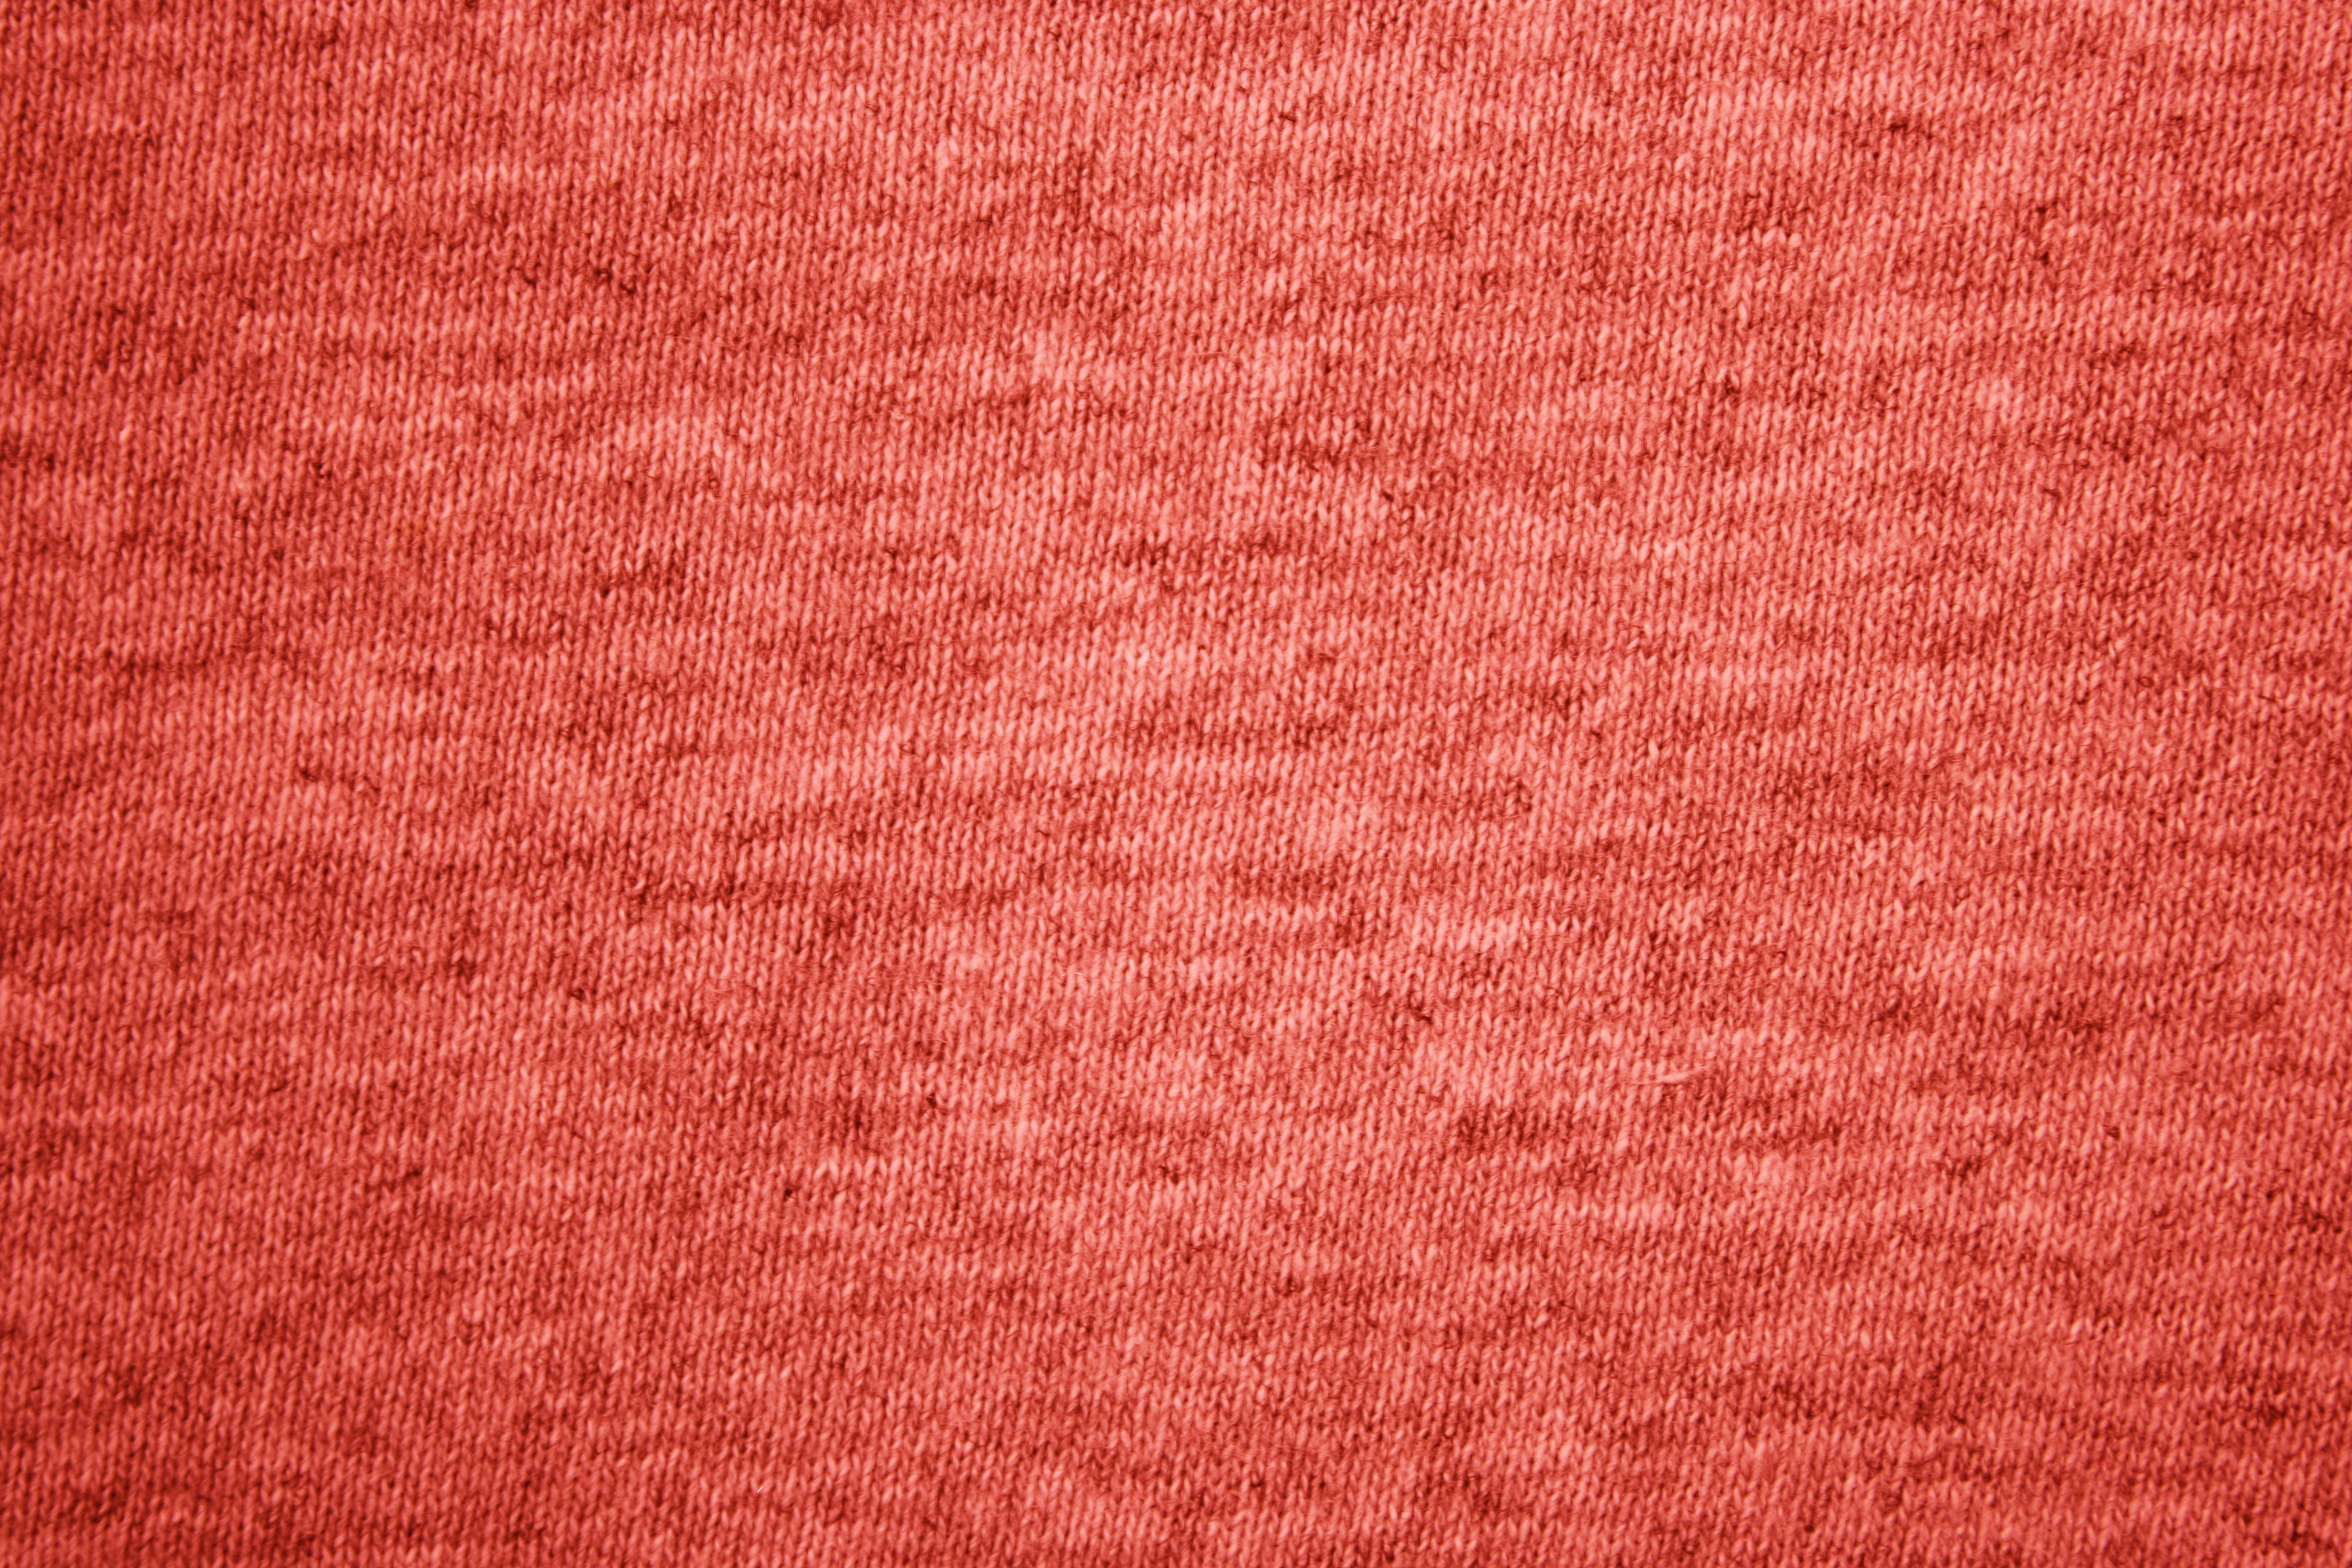 Red Heather Knit T-Shirt Fabric Texture Picture